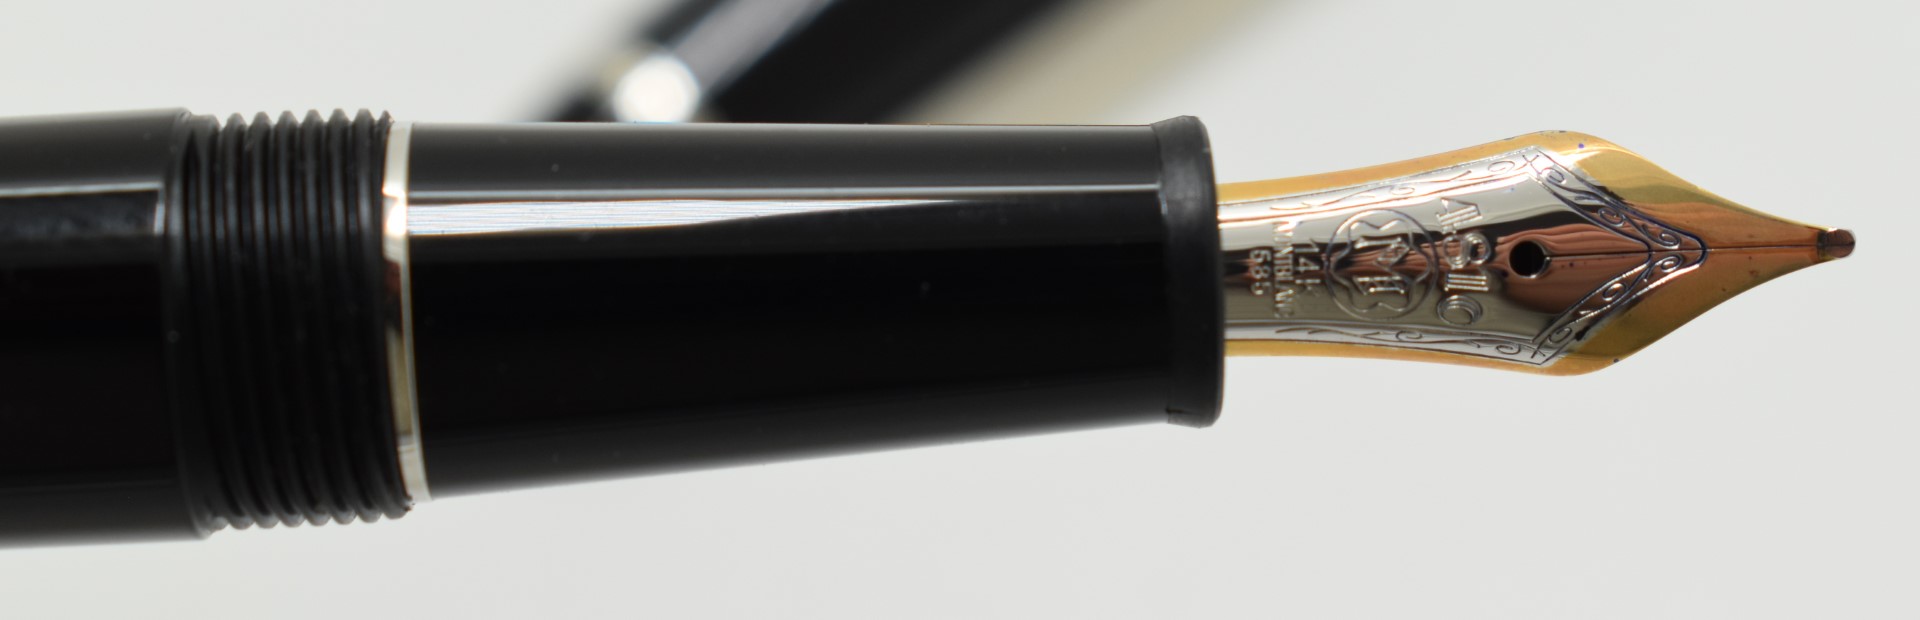 Montblanc Meisterstuck fountain pen with 14k gold nib marked 4810, in original box with service - Image 12 of 16